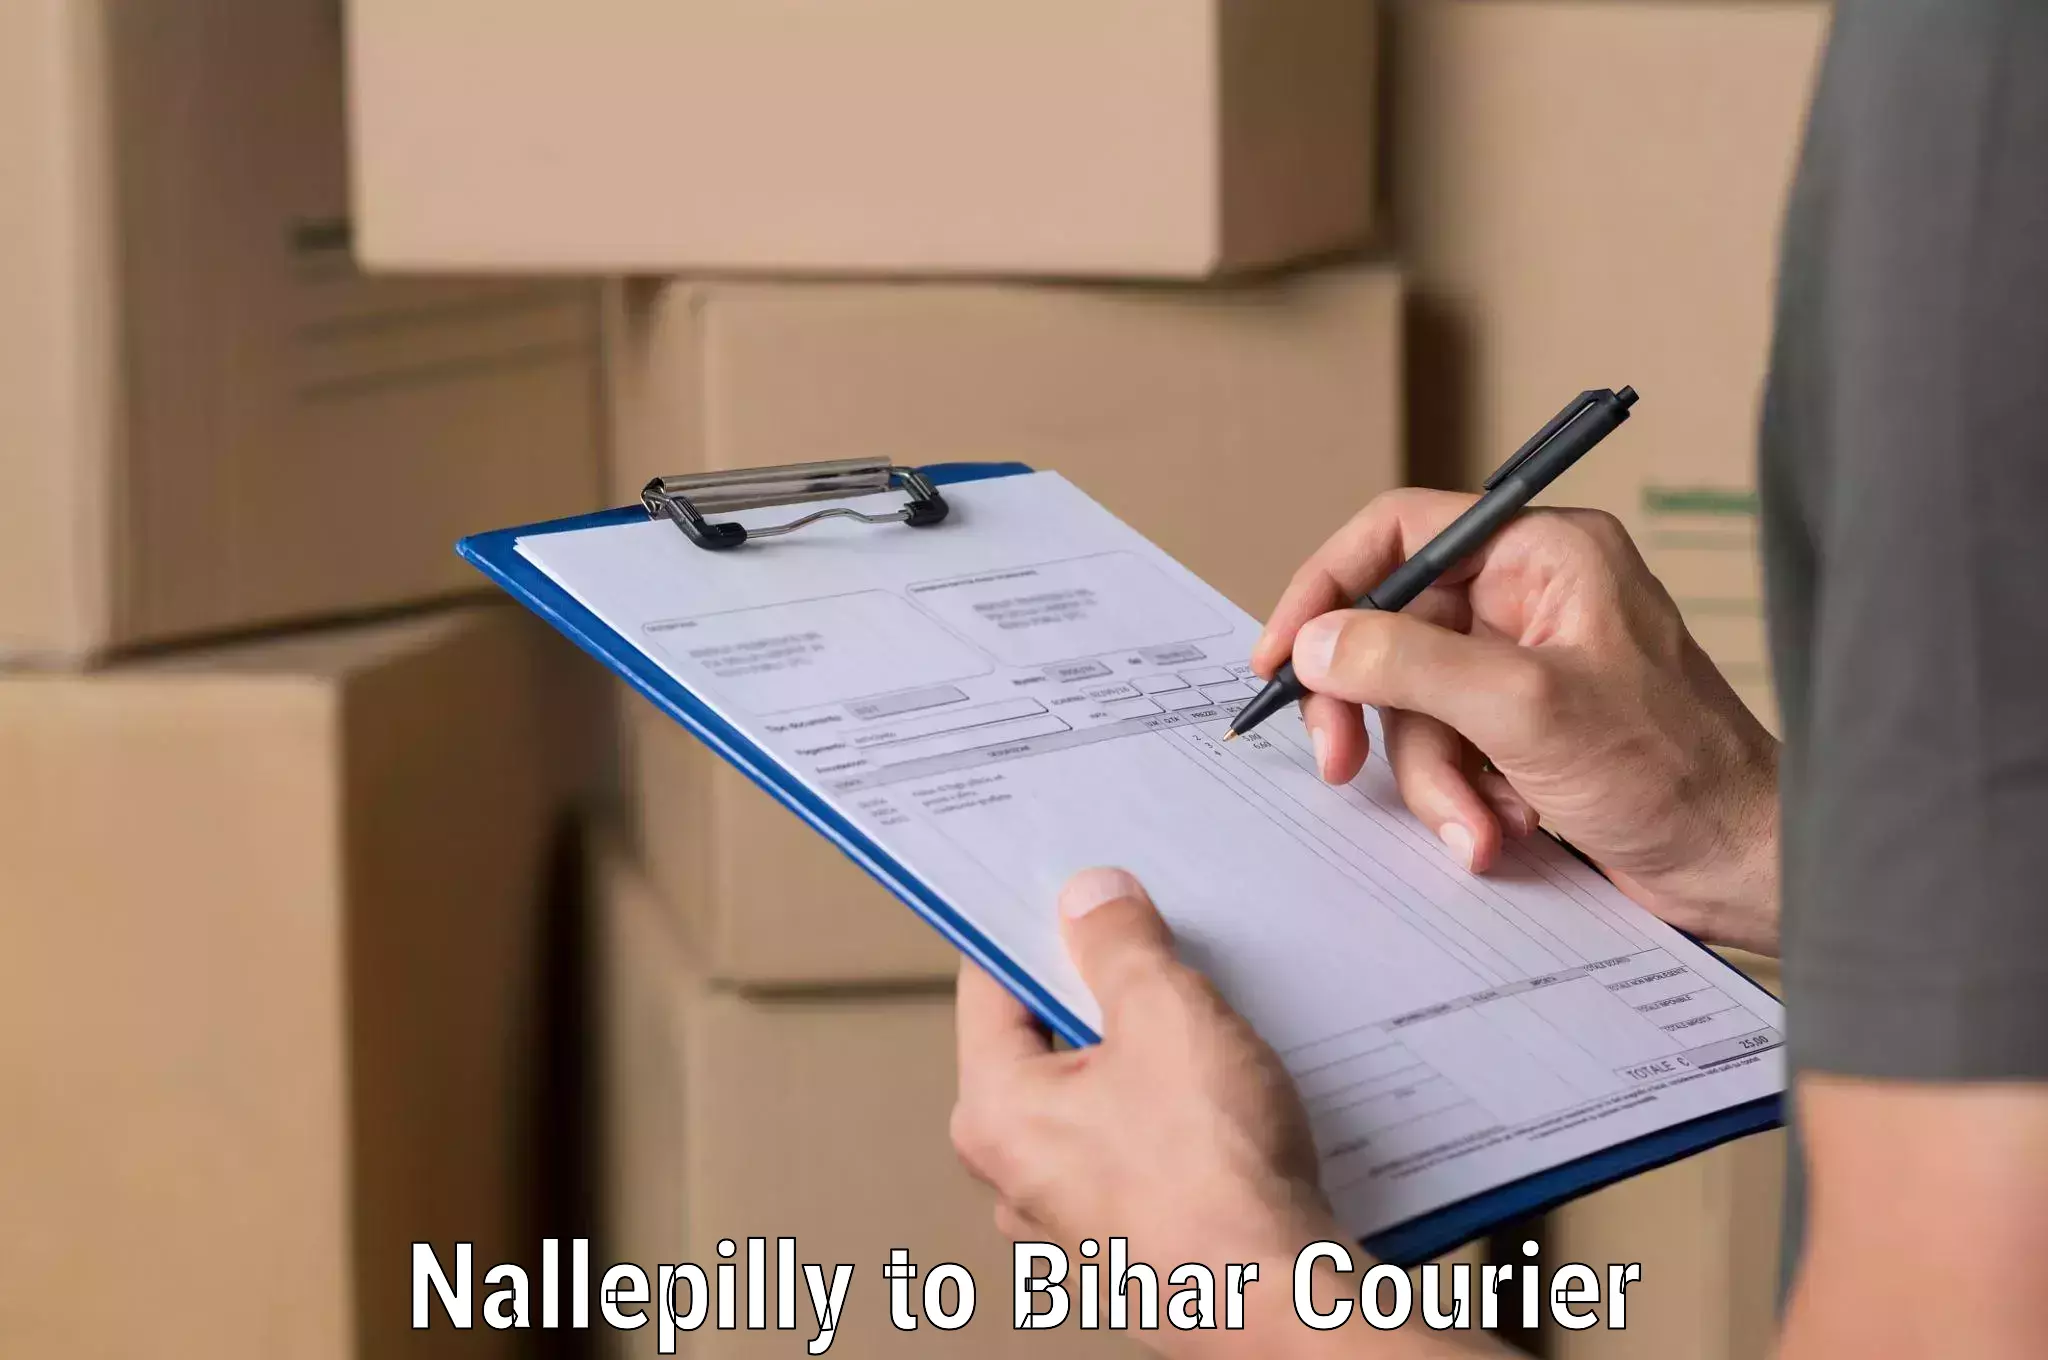 Courier service innovation in Nallepilly to Biraul